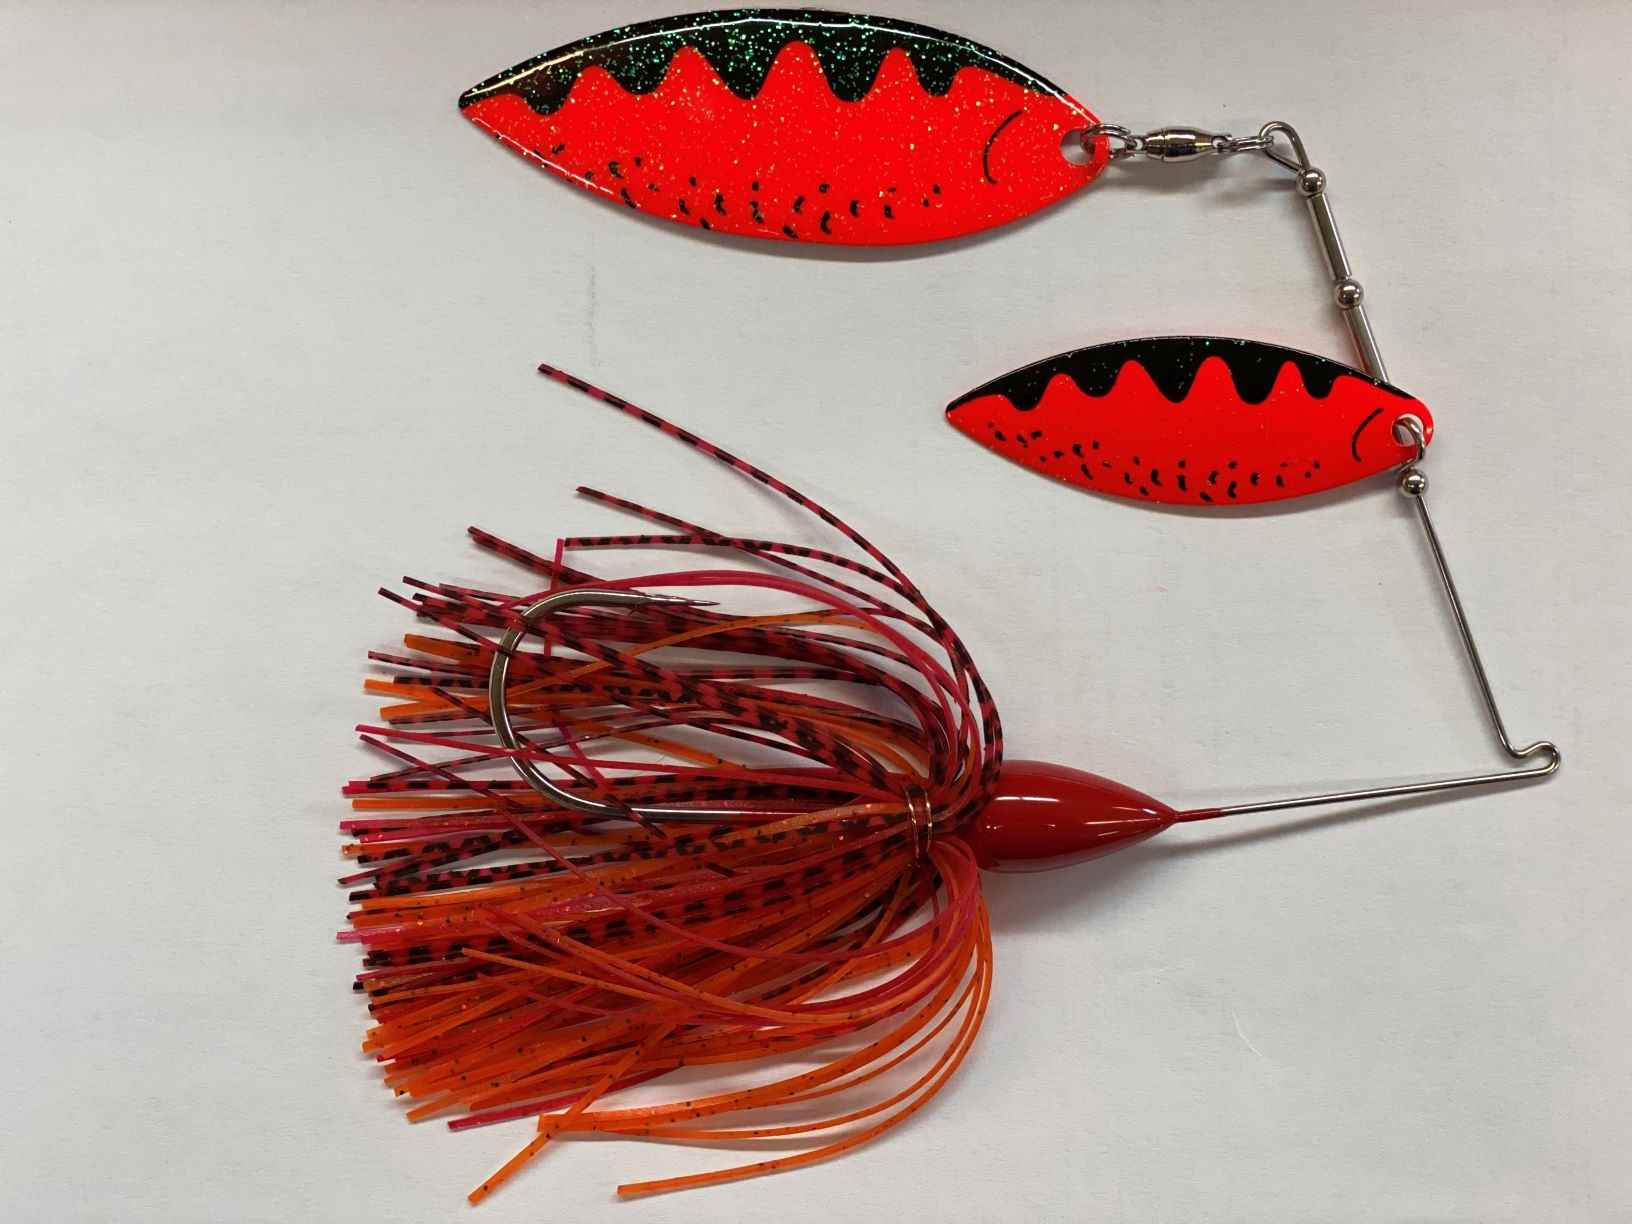 What color would you use of the spinner bait in murky water